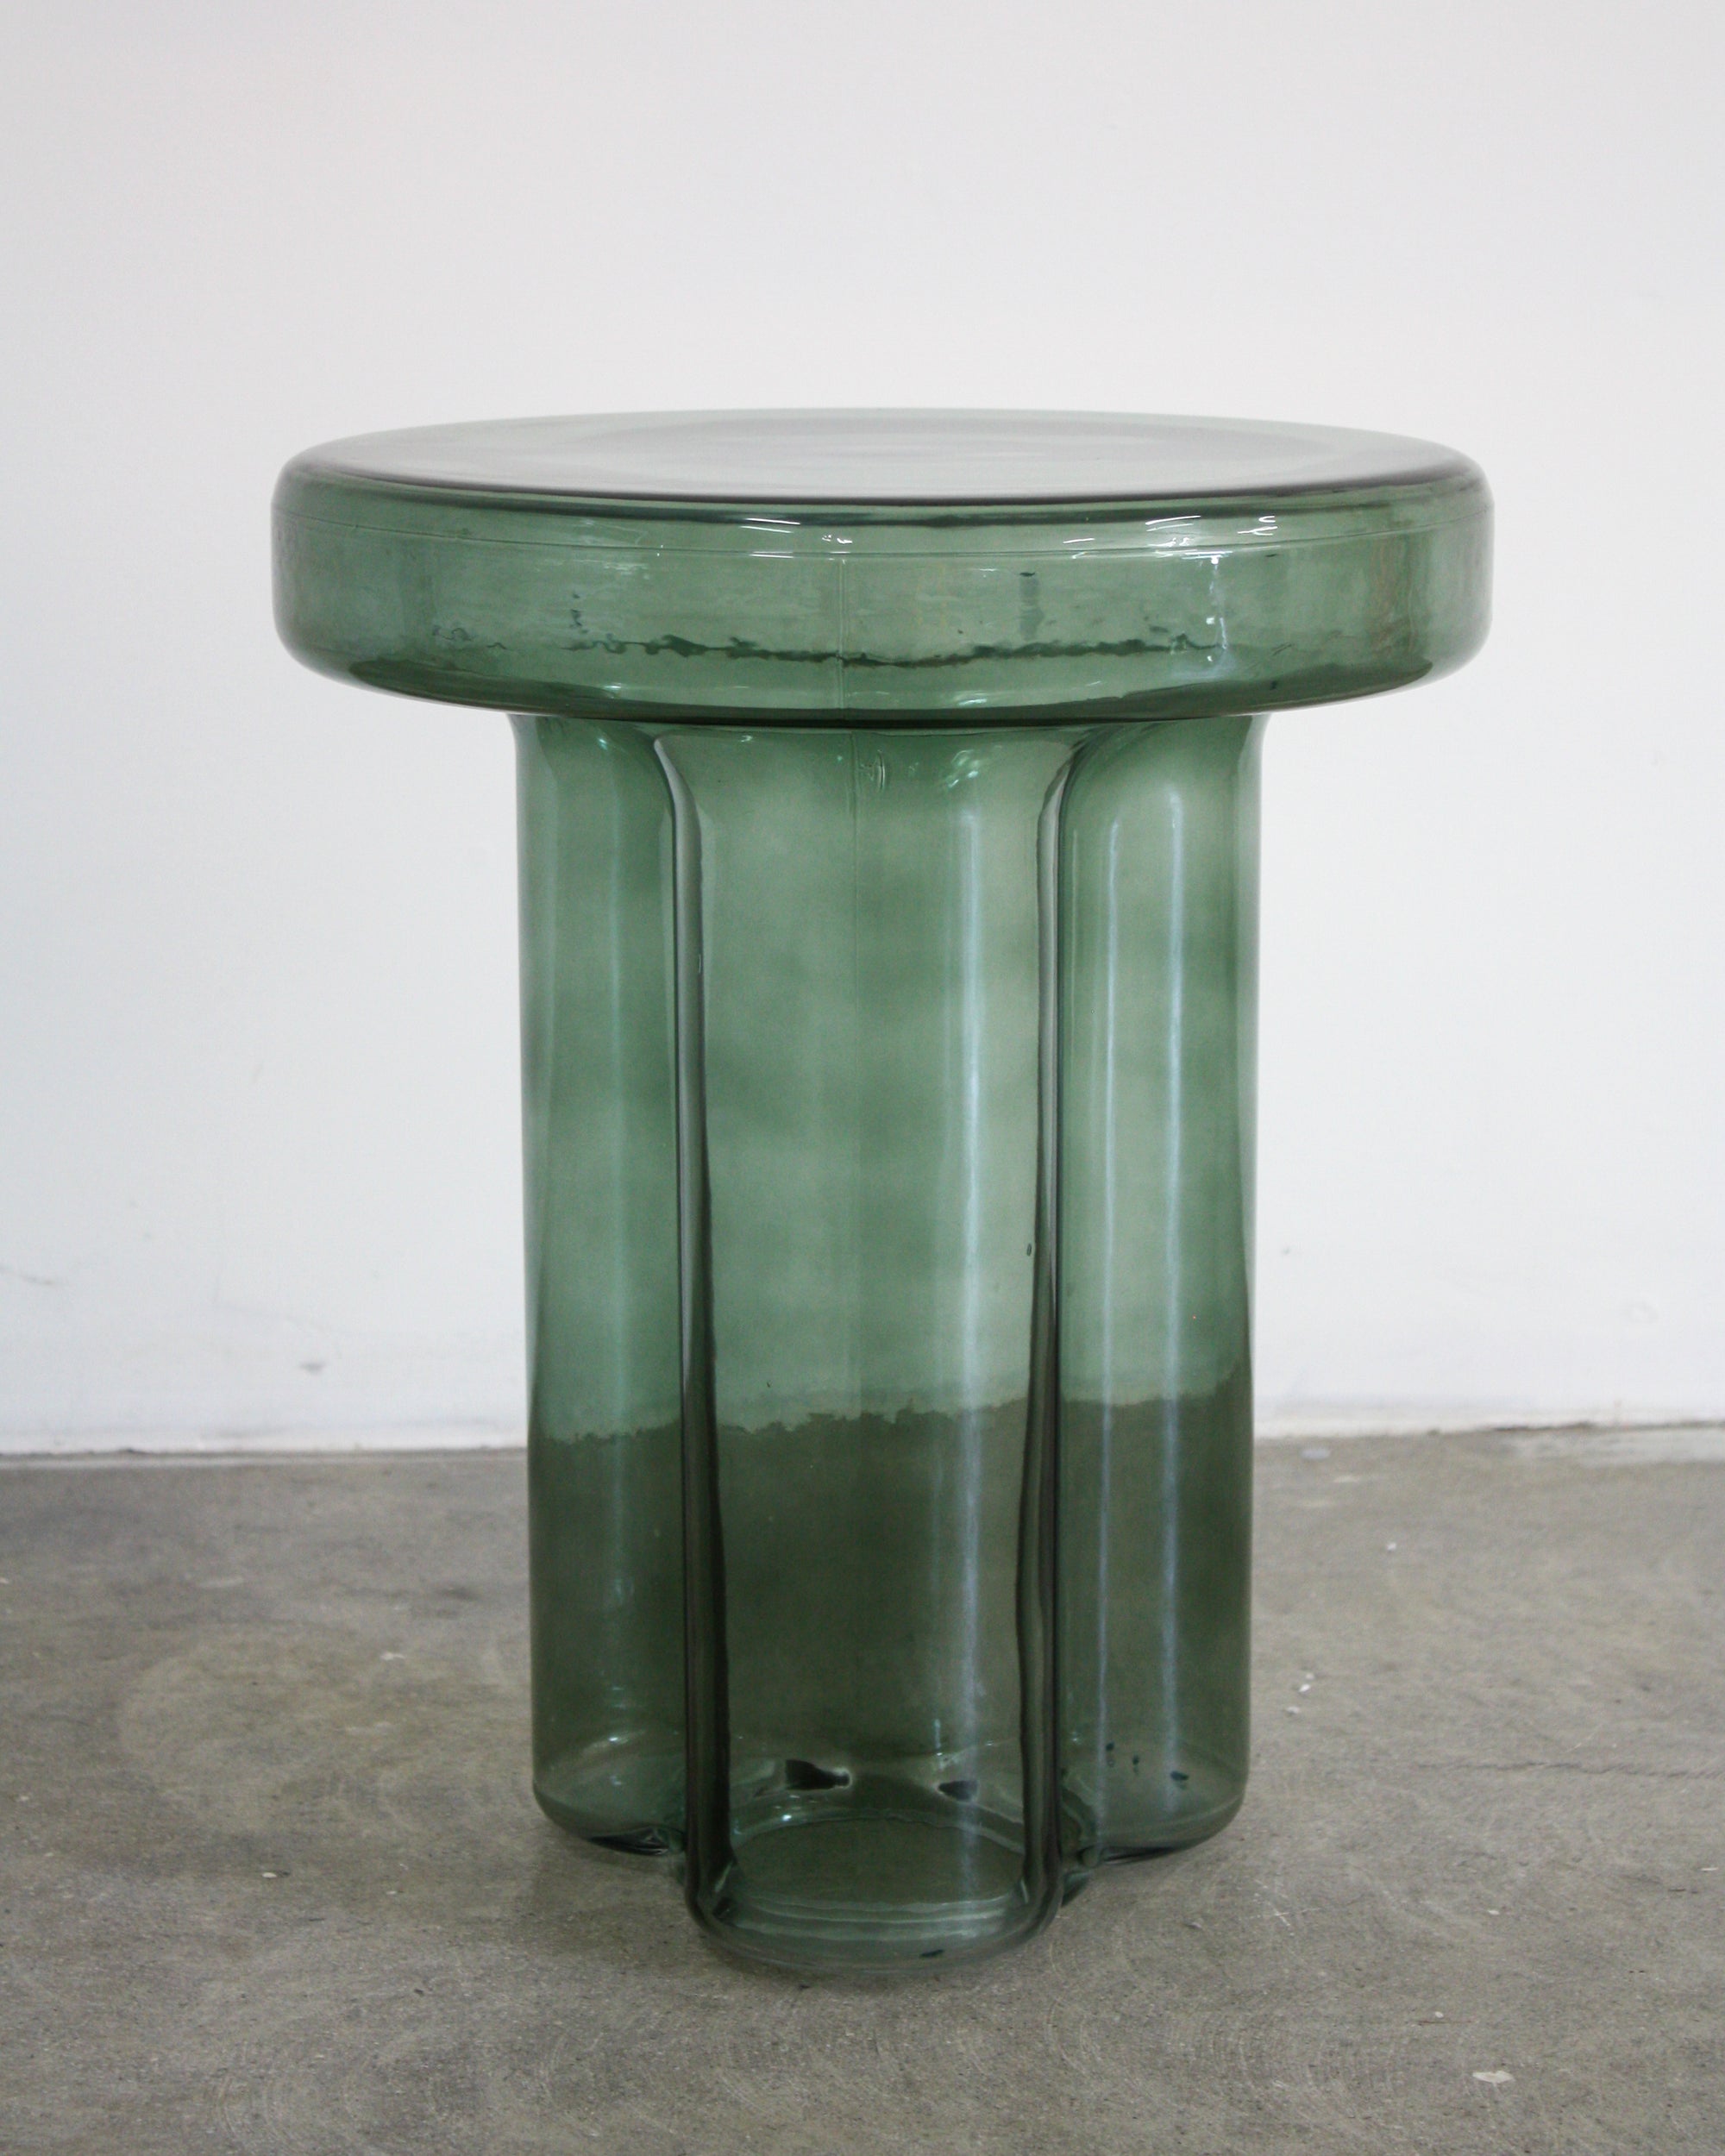 Glass Soda End Table Dupe - Miniforms Pedestal Table Dupe - Green, Skinny Glass Coffee Table